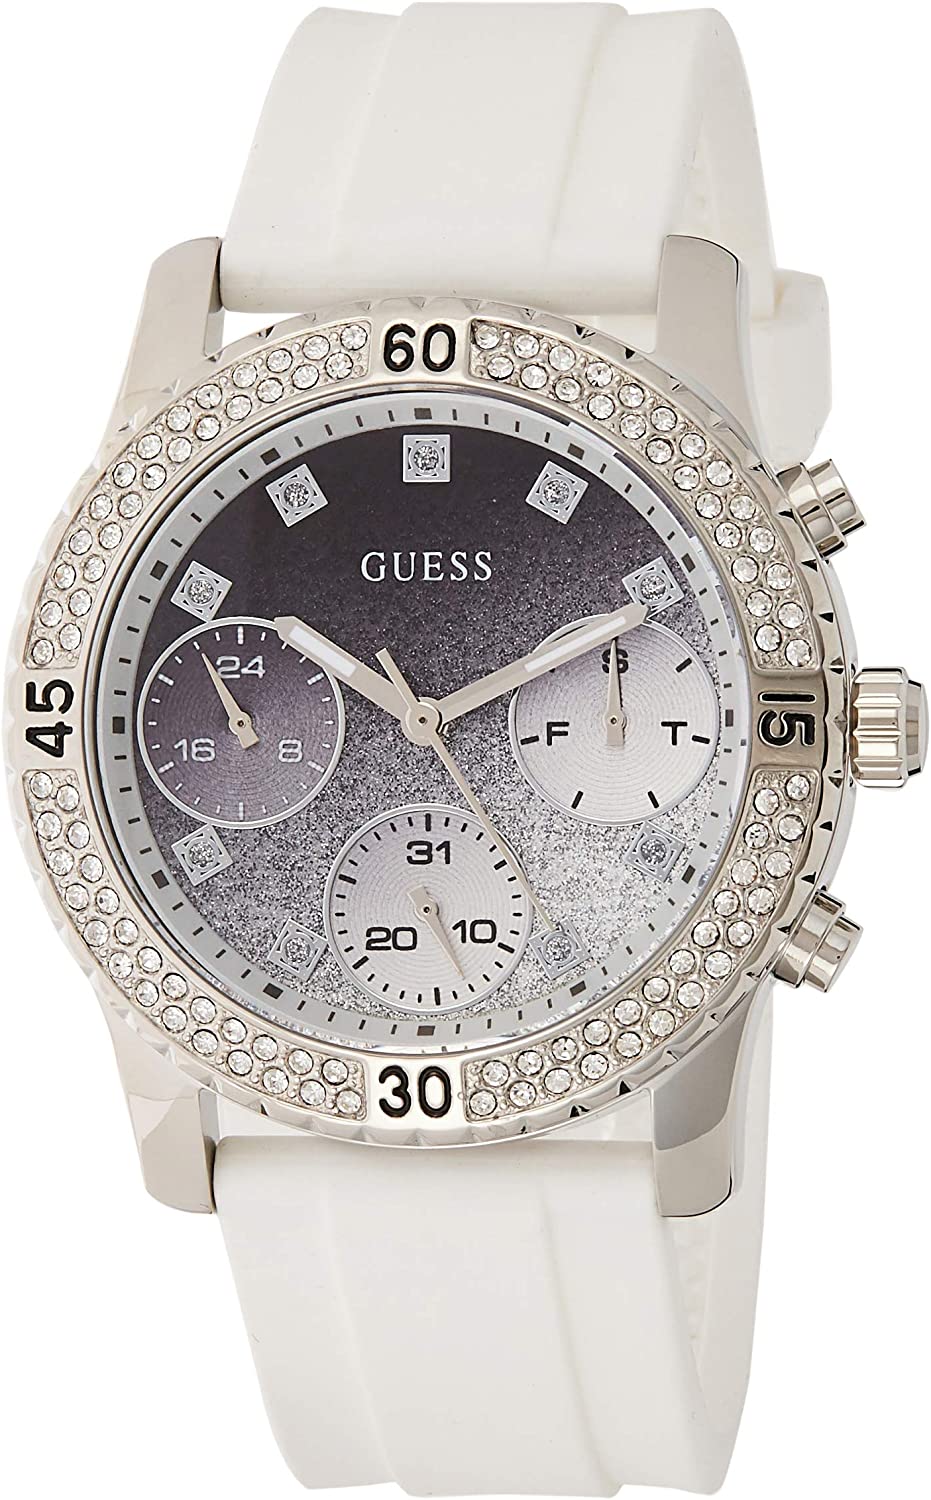 ĐỒNG HỒ NỮ DÂY SILICONE GUESS CONFETTI W1098L1 WOMEN´S WATCH 38 MM RUBBER STRAP WHITE BATTERY 3